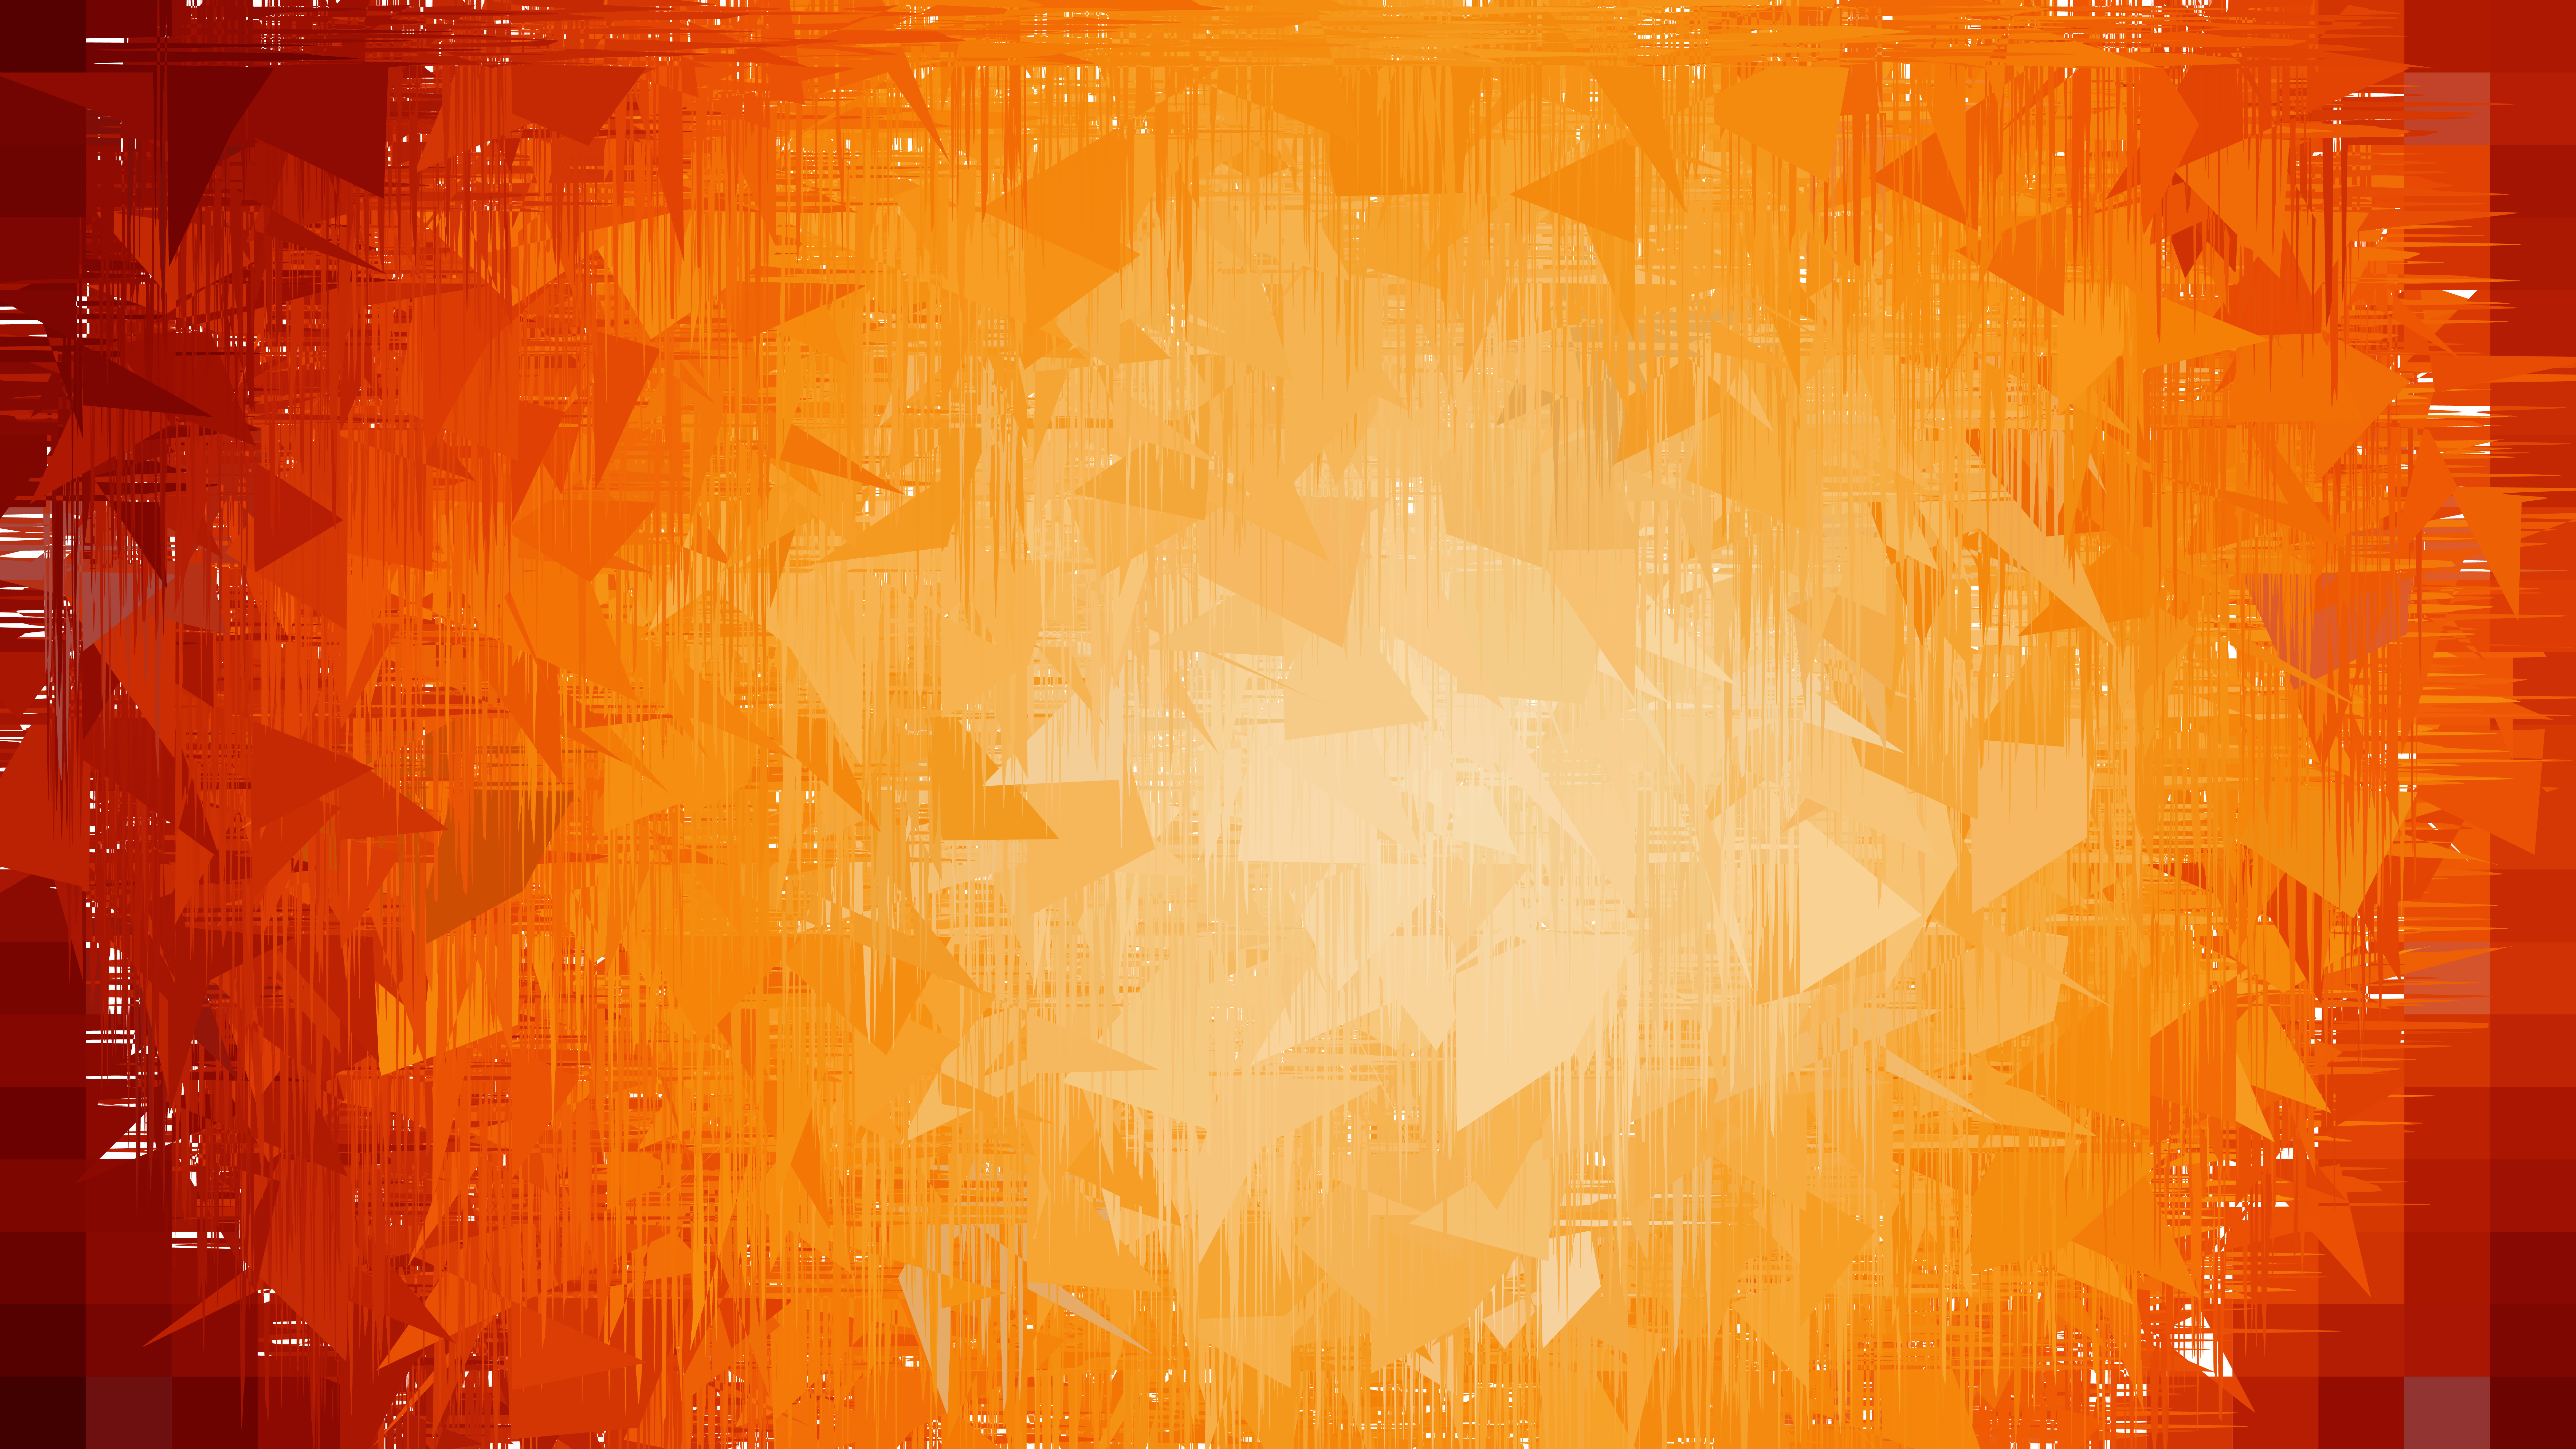 Free Red and Orange Abstract Texture Background Illustrator